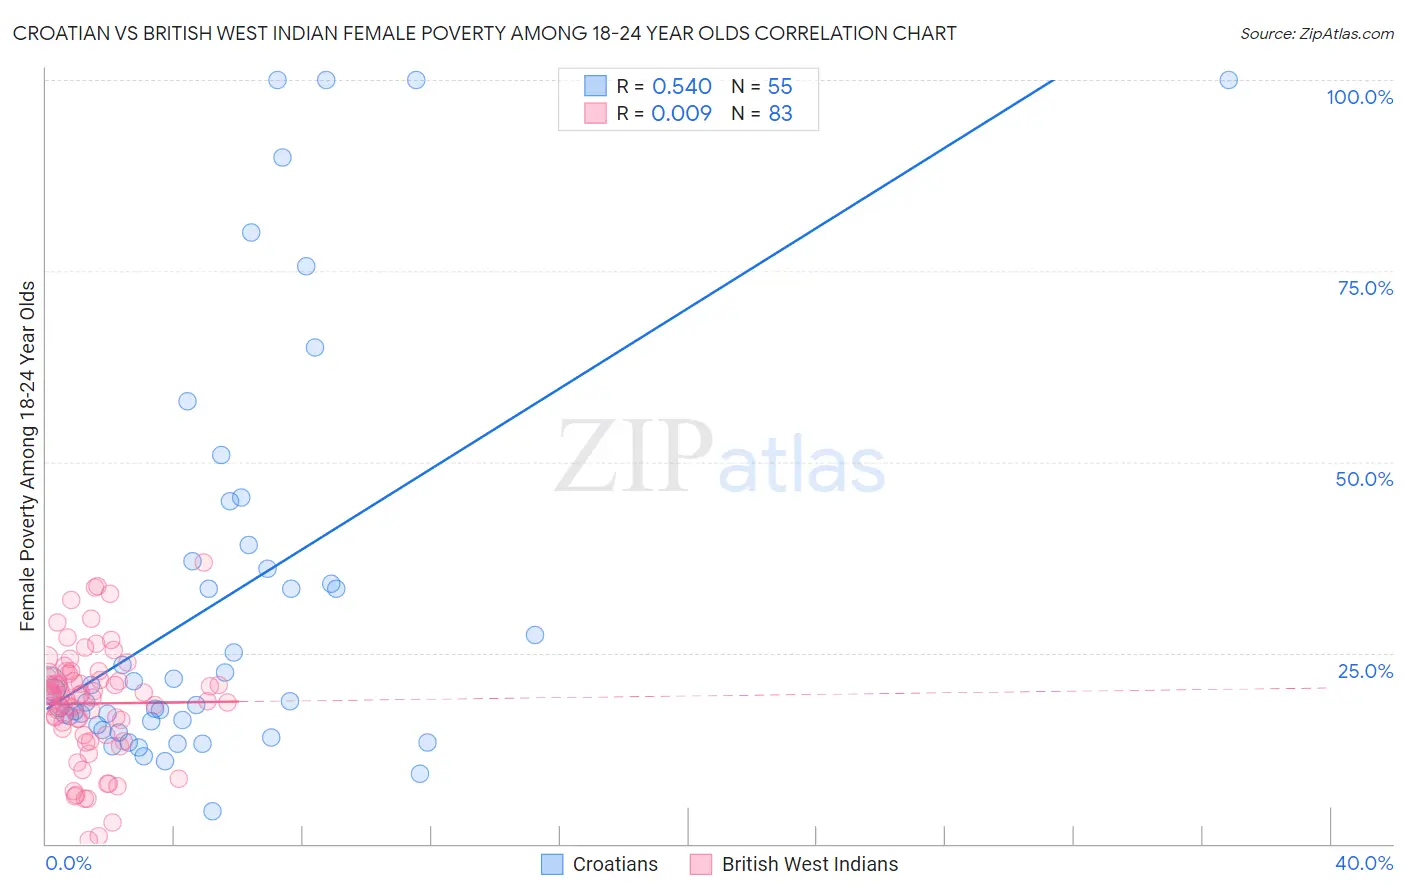 Croatian vs British West Indian Female Poverty Among 18-24 Year Olds